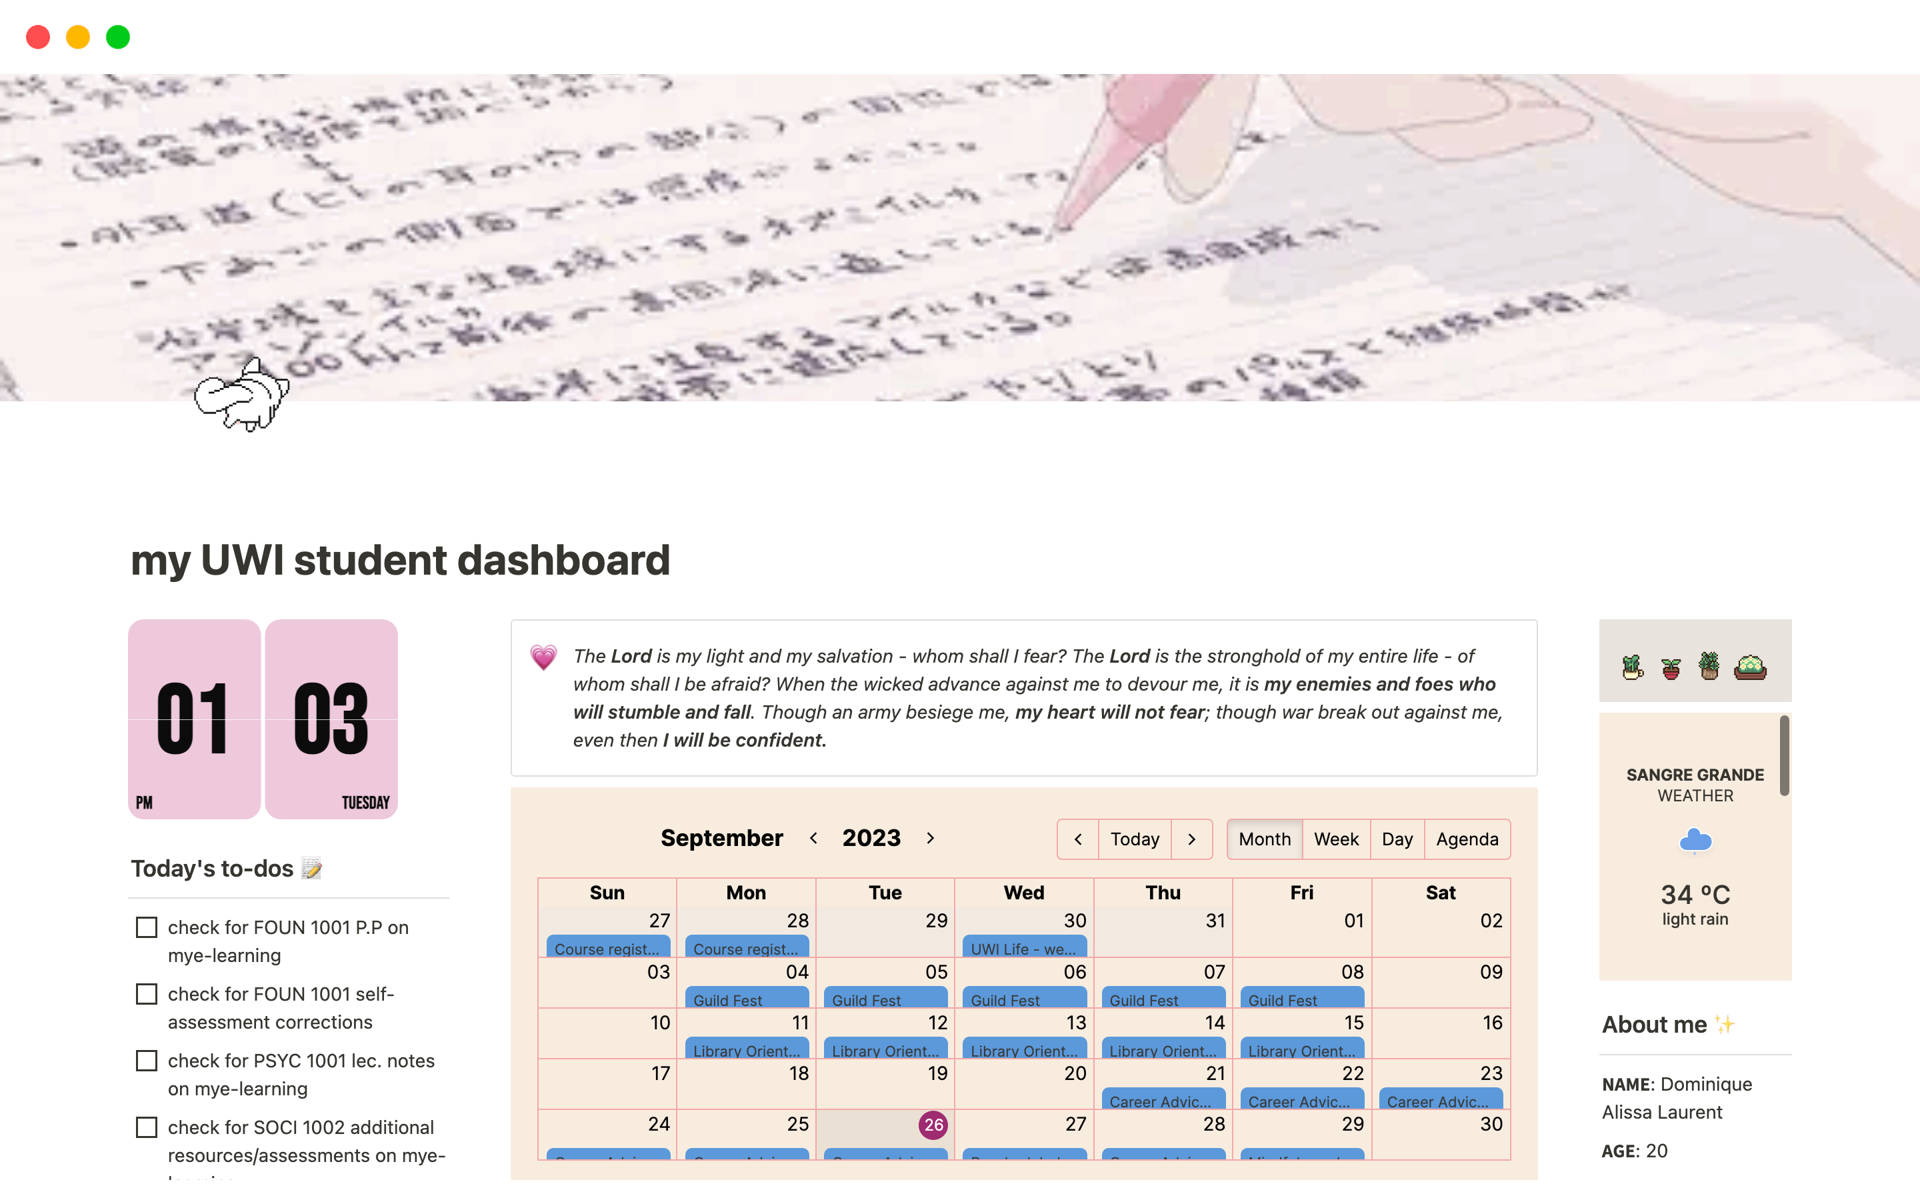 Designed to carefully organize course materials with as much ease as possible.